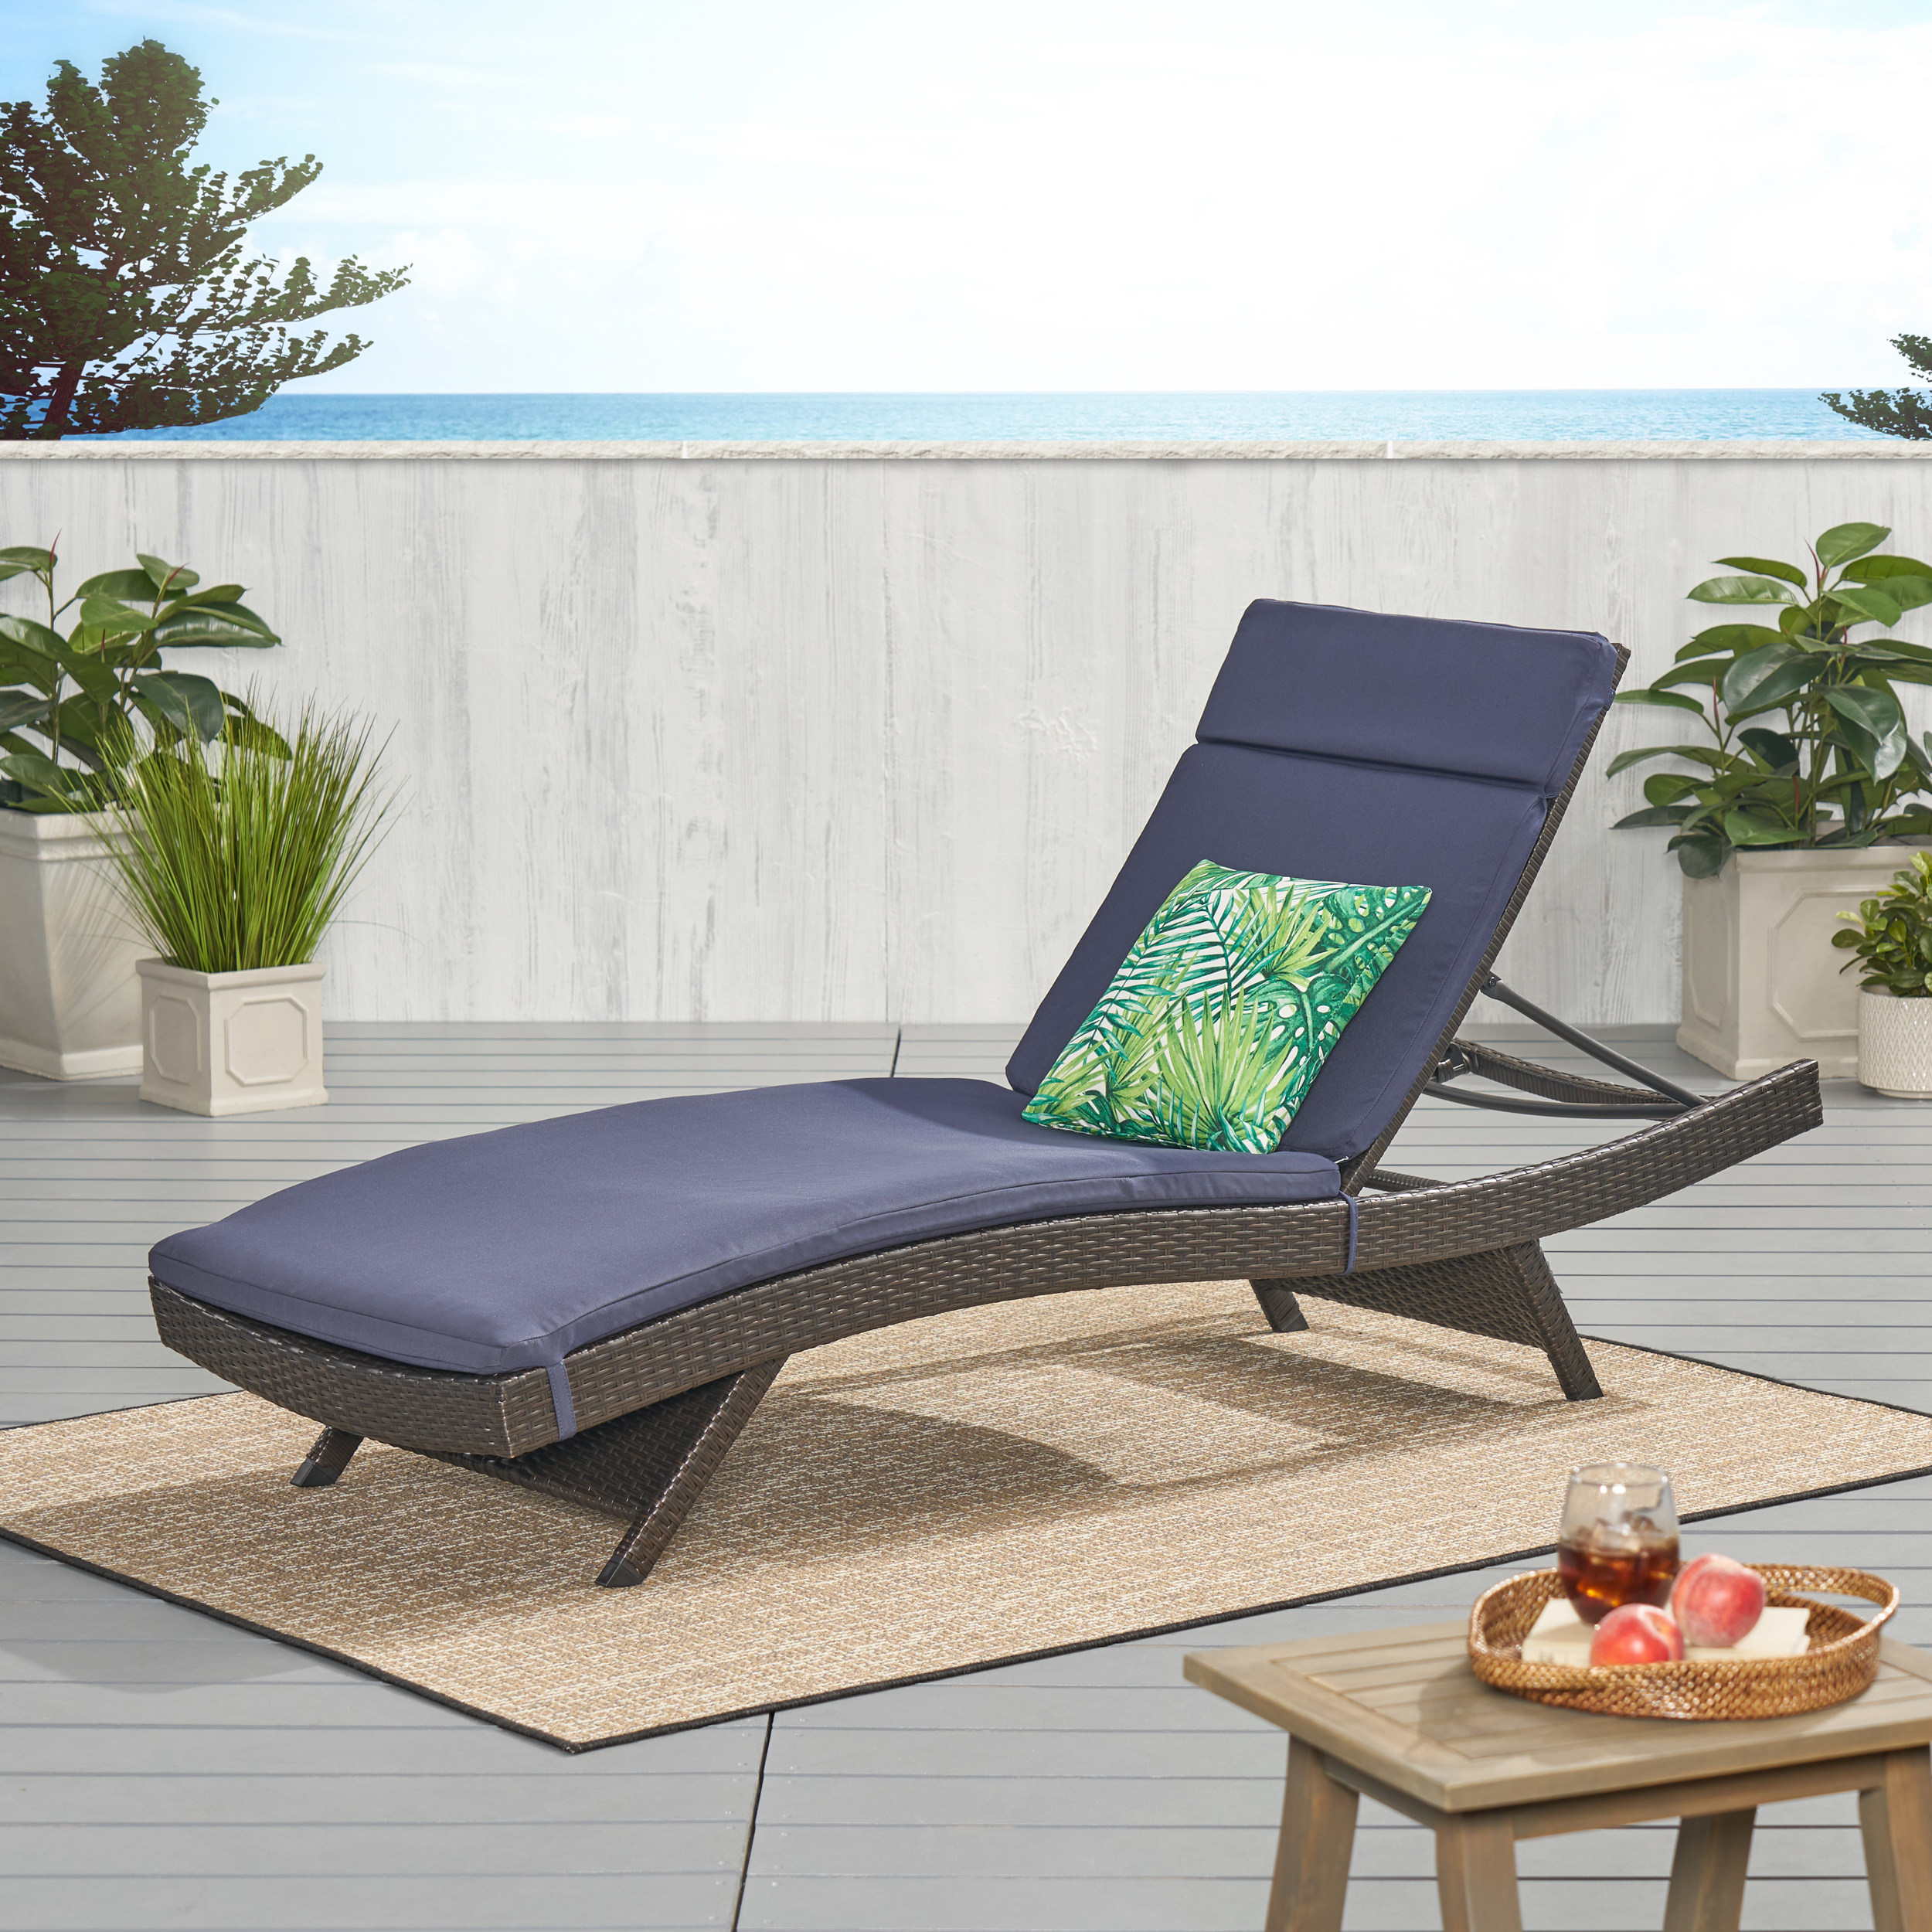 Lakeport Outdoor Adjustable Chaise Lounge Chair With Cushion - Blue Cushion